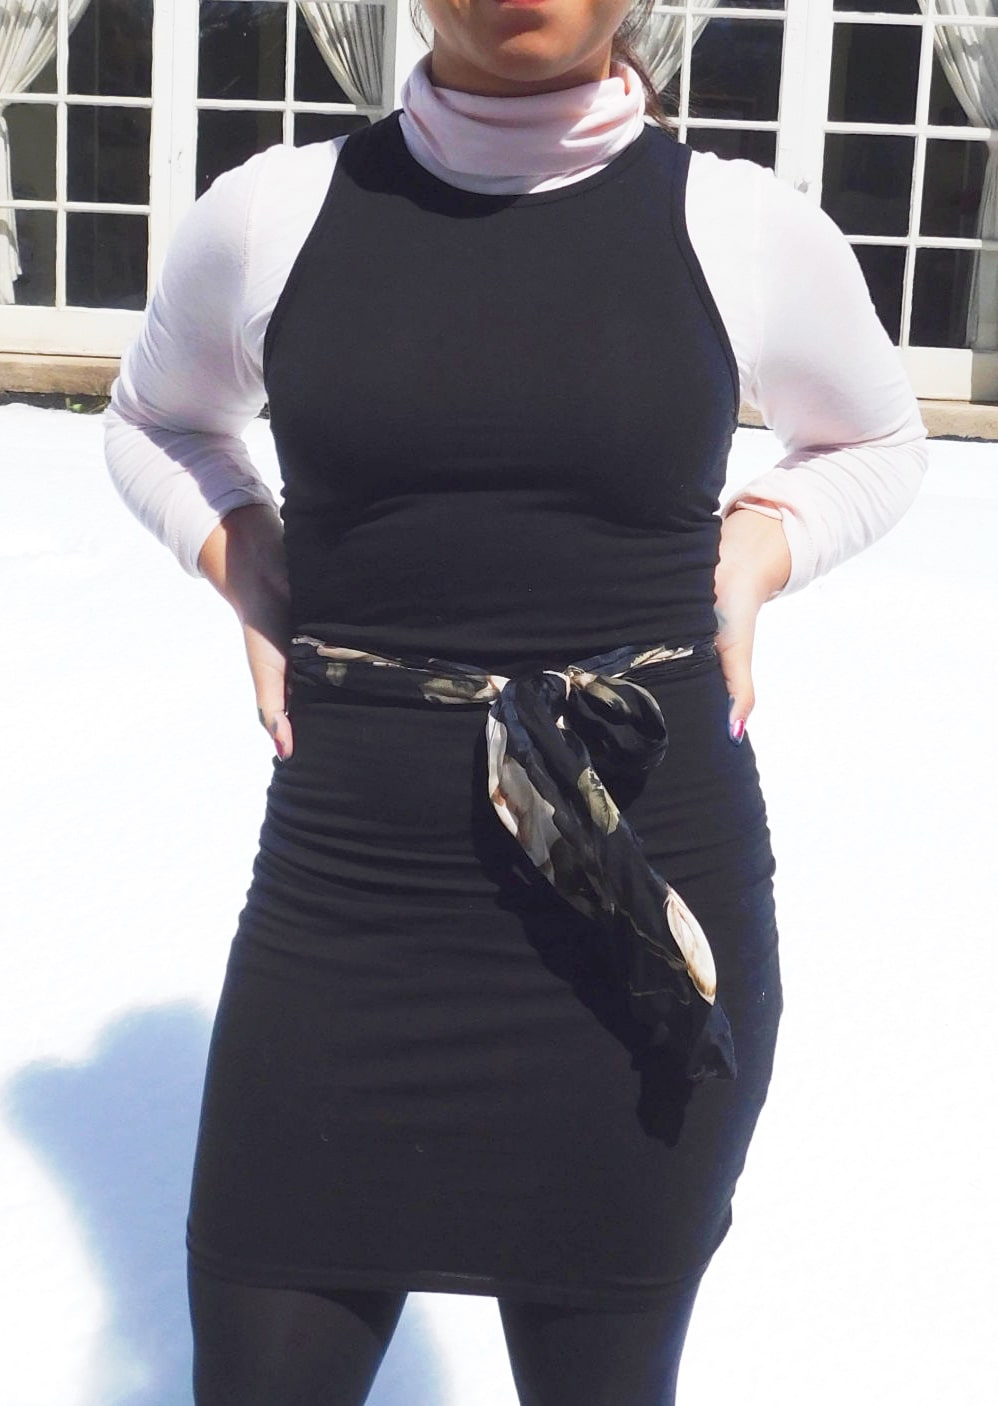 This high-neck black bodycon tank dress is worn with opaque black tights, a pastel pink hand-me-down turtleneck, and a thrifted silky scarf worn as a belt.